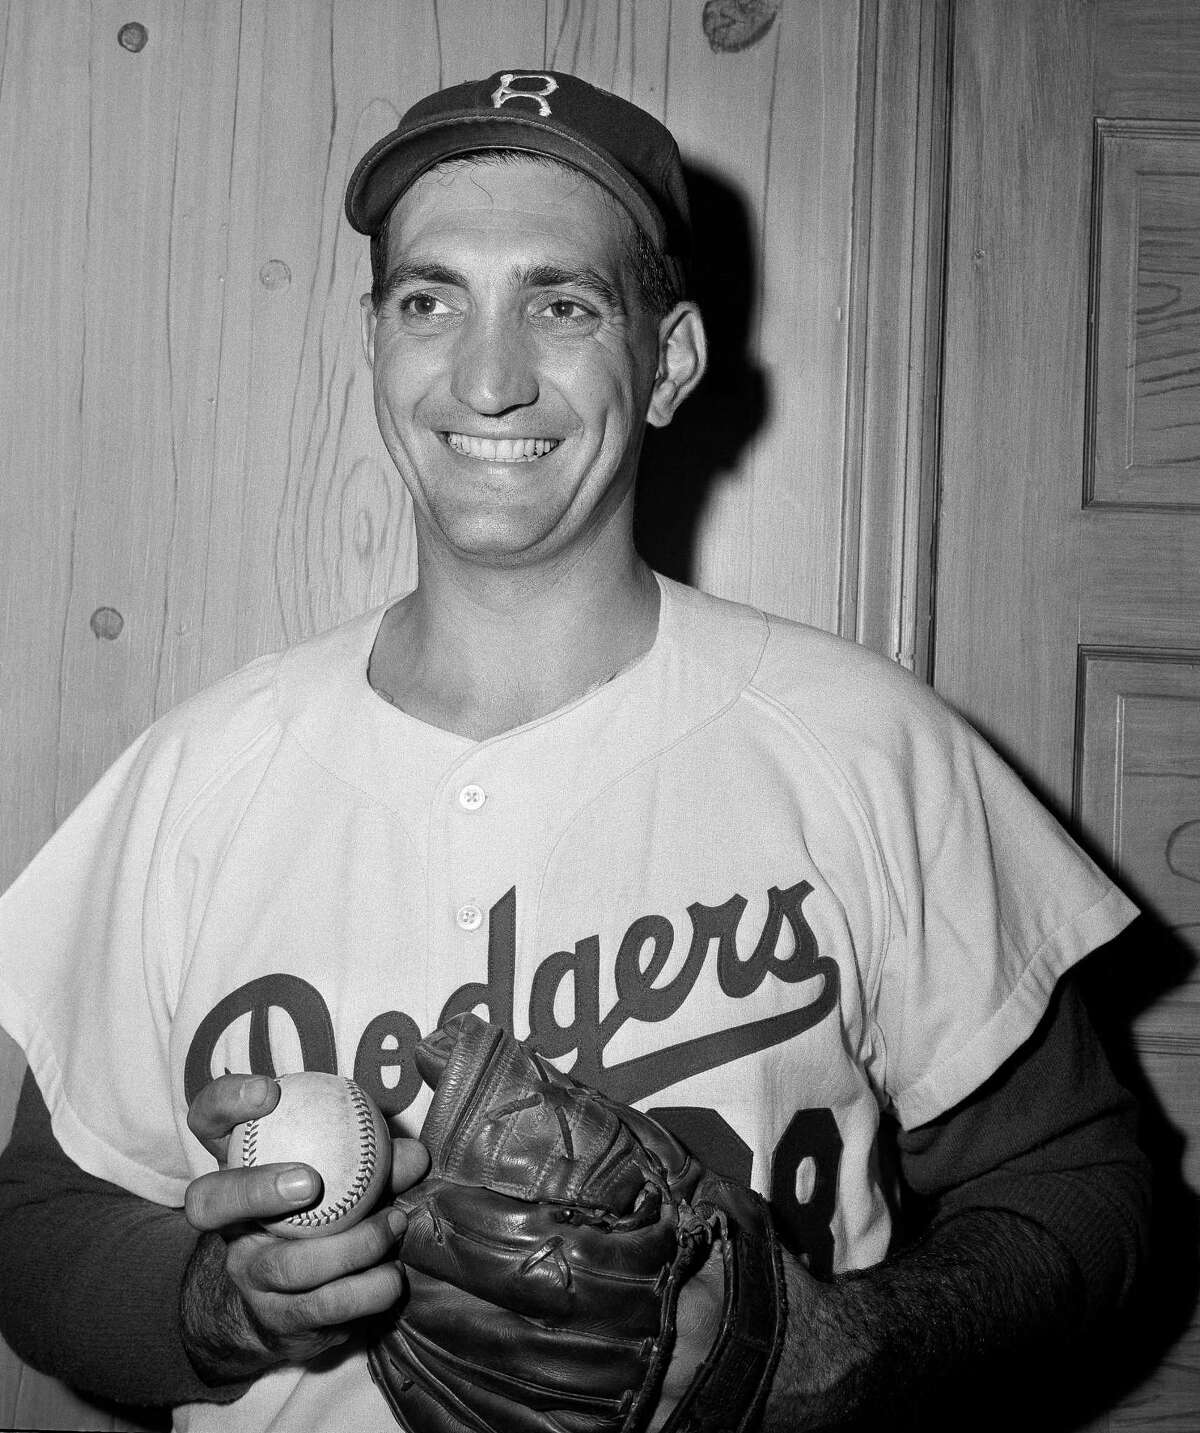 This is a Sept. 2, 1956 photo showing Brooklyn Dodgers pitcher Ralph Branca. Branca, the Dodgers pitcher who gave up the home run dubbed the “Shot Heard ‘Round the World,” has died at the age of 90. His son-in-law Bobby Valentine, a former major league manager, says Branca died Wednesday, Nov. 23, 2016 at a nursing home in Rye, New York.